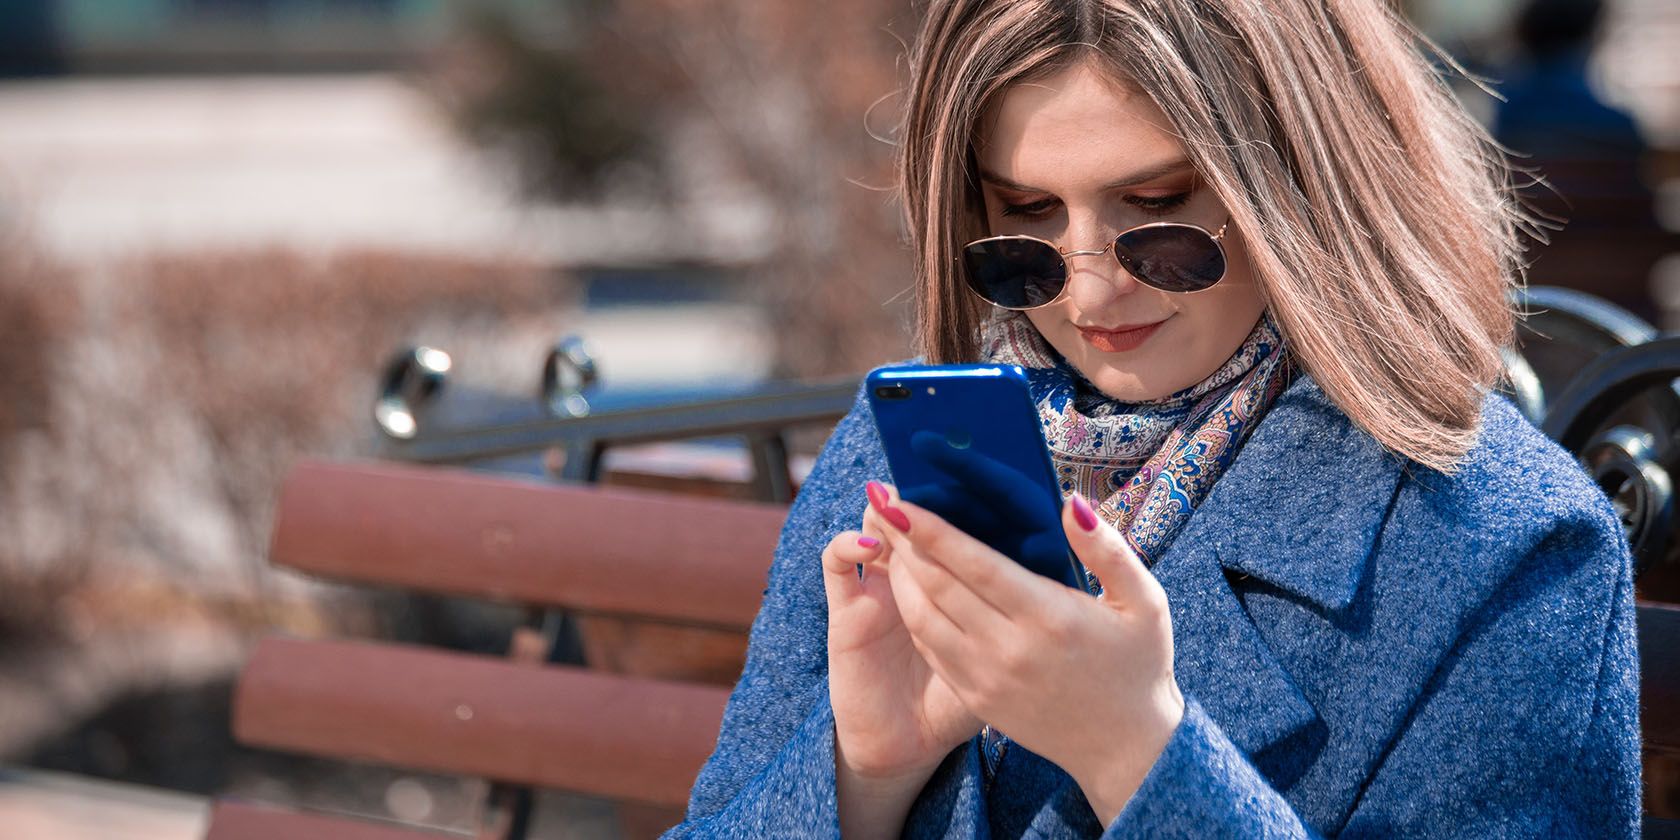 Person with sunglasses looking at smartphone